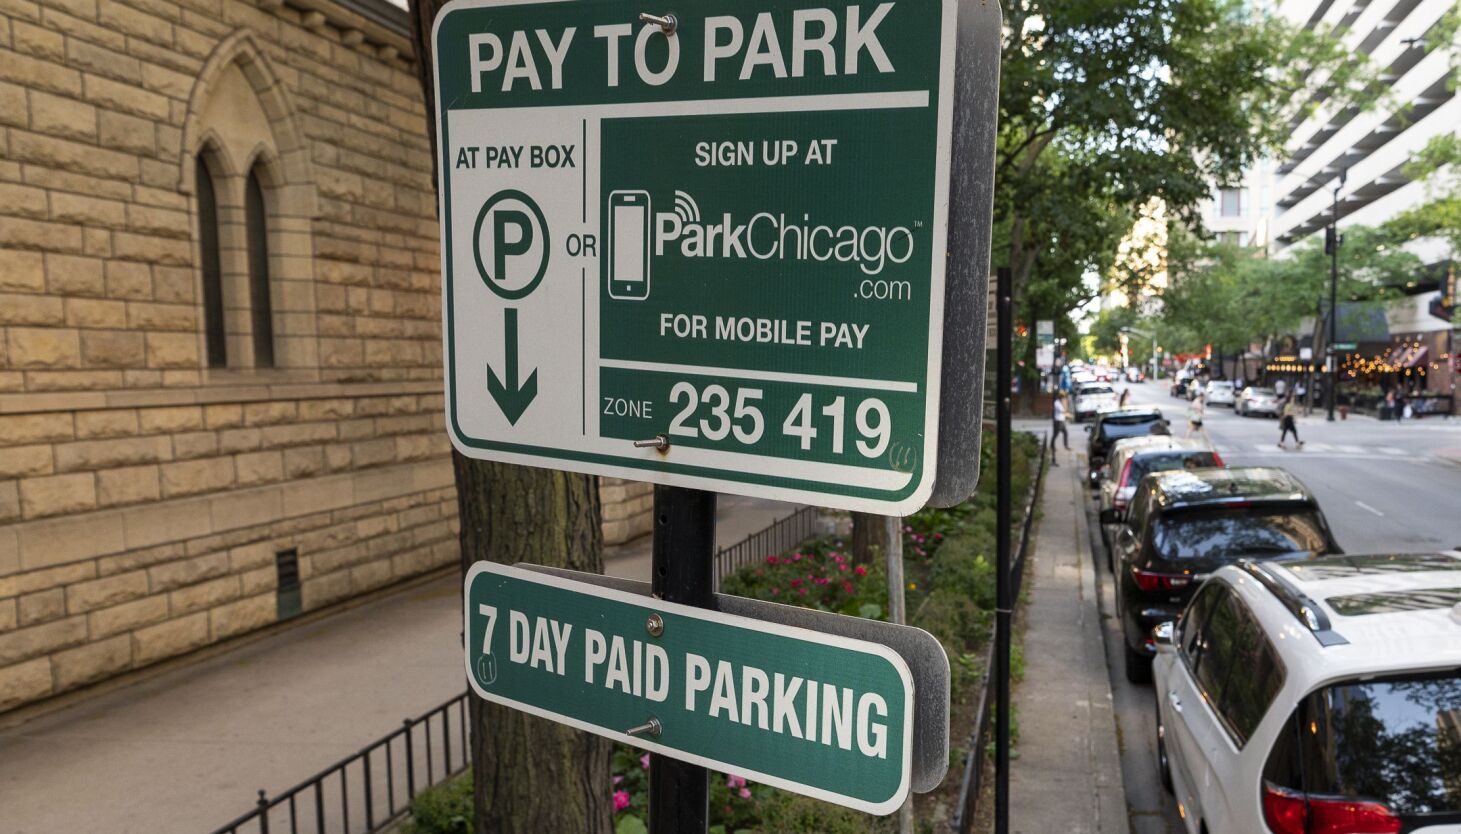 Chicago sold rights to 36k parking meters for $1.2B that generate $200M per year